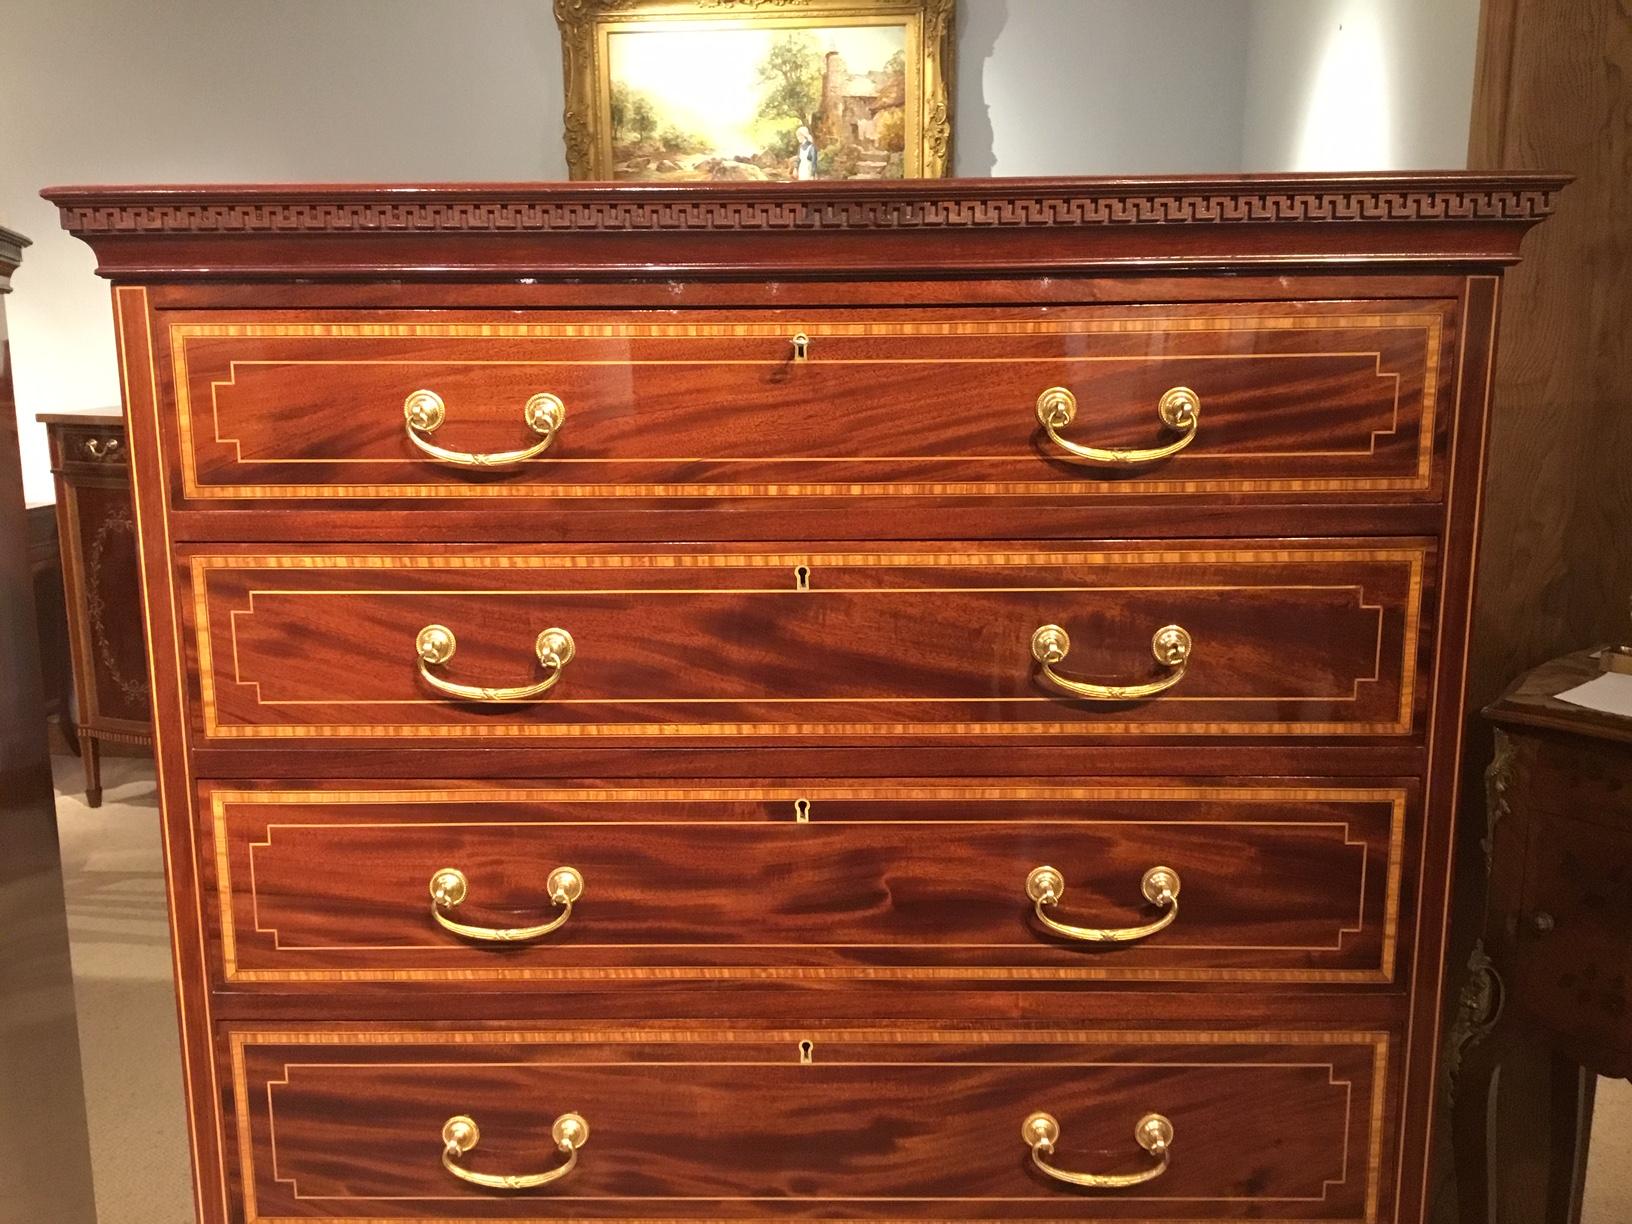 A superb quality pair of Edwardian Period mahogany inlaid chests. Each constructed using the finest quality mahogany. Having solid mahogany tops with satinwood crossbanding above Greek key moulding to the frieze. Each chest has six graduating